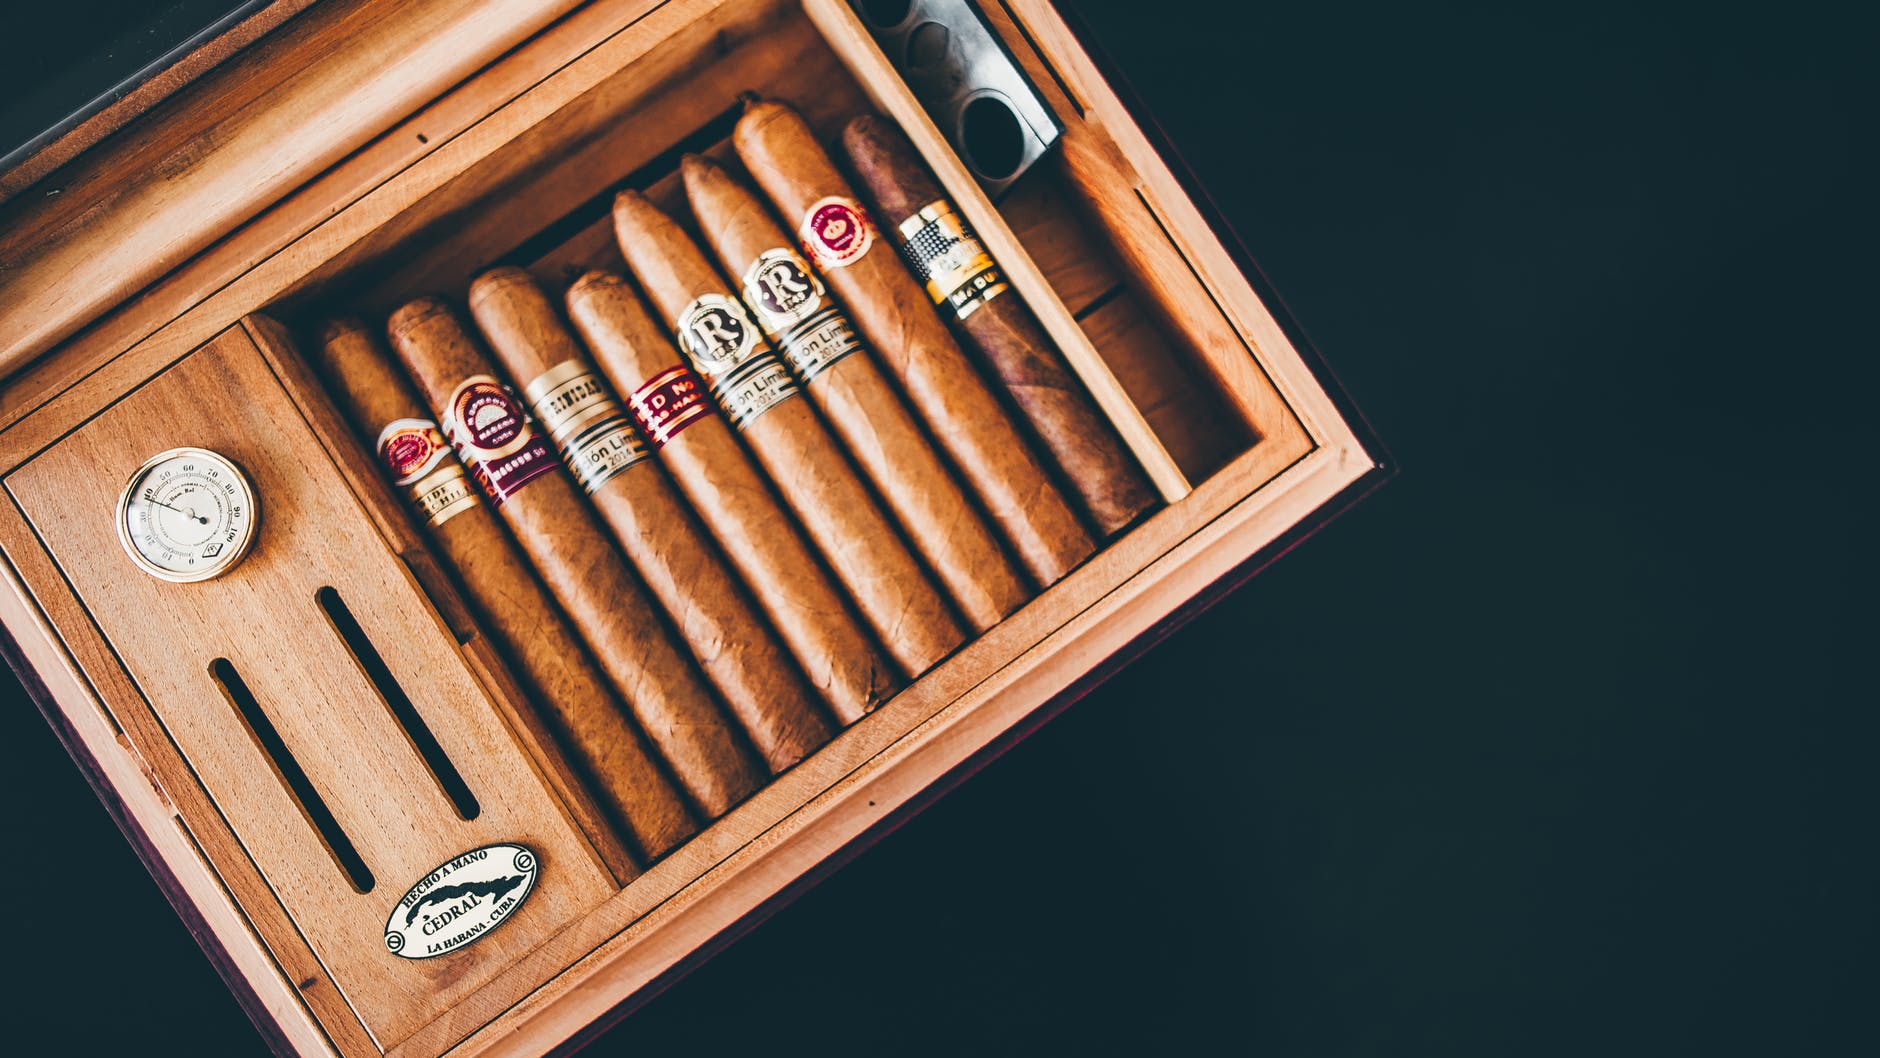 Effective Methods to Properly Store Cigars Without a Humidor – Preserving the Flavor and Freshness